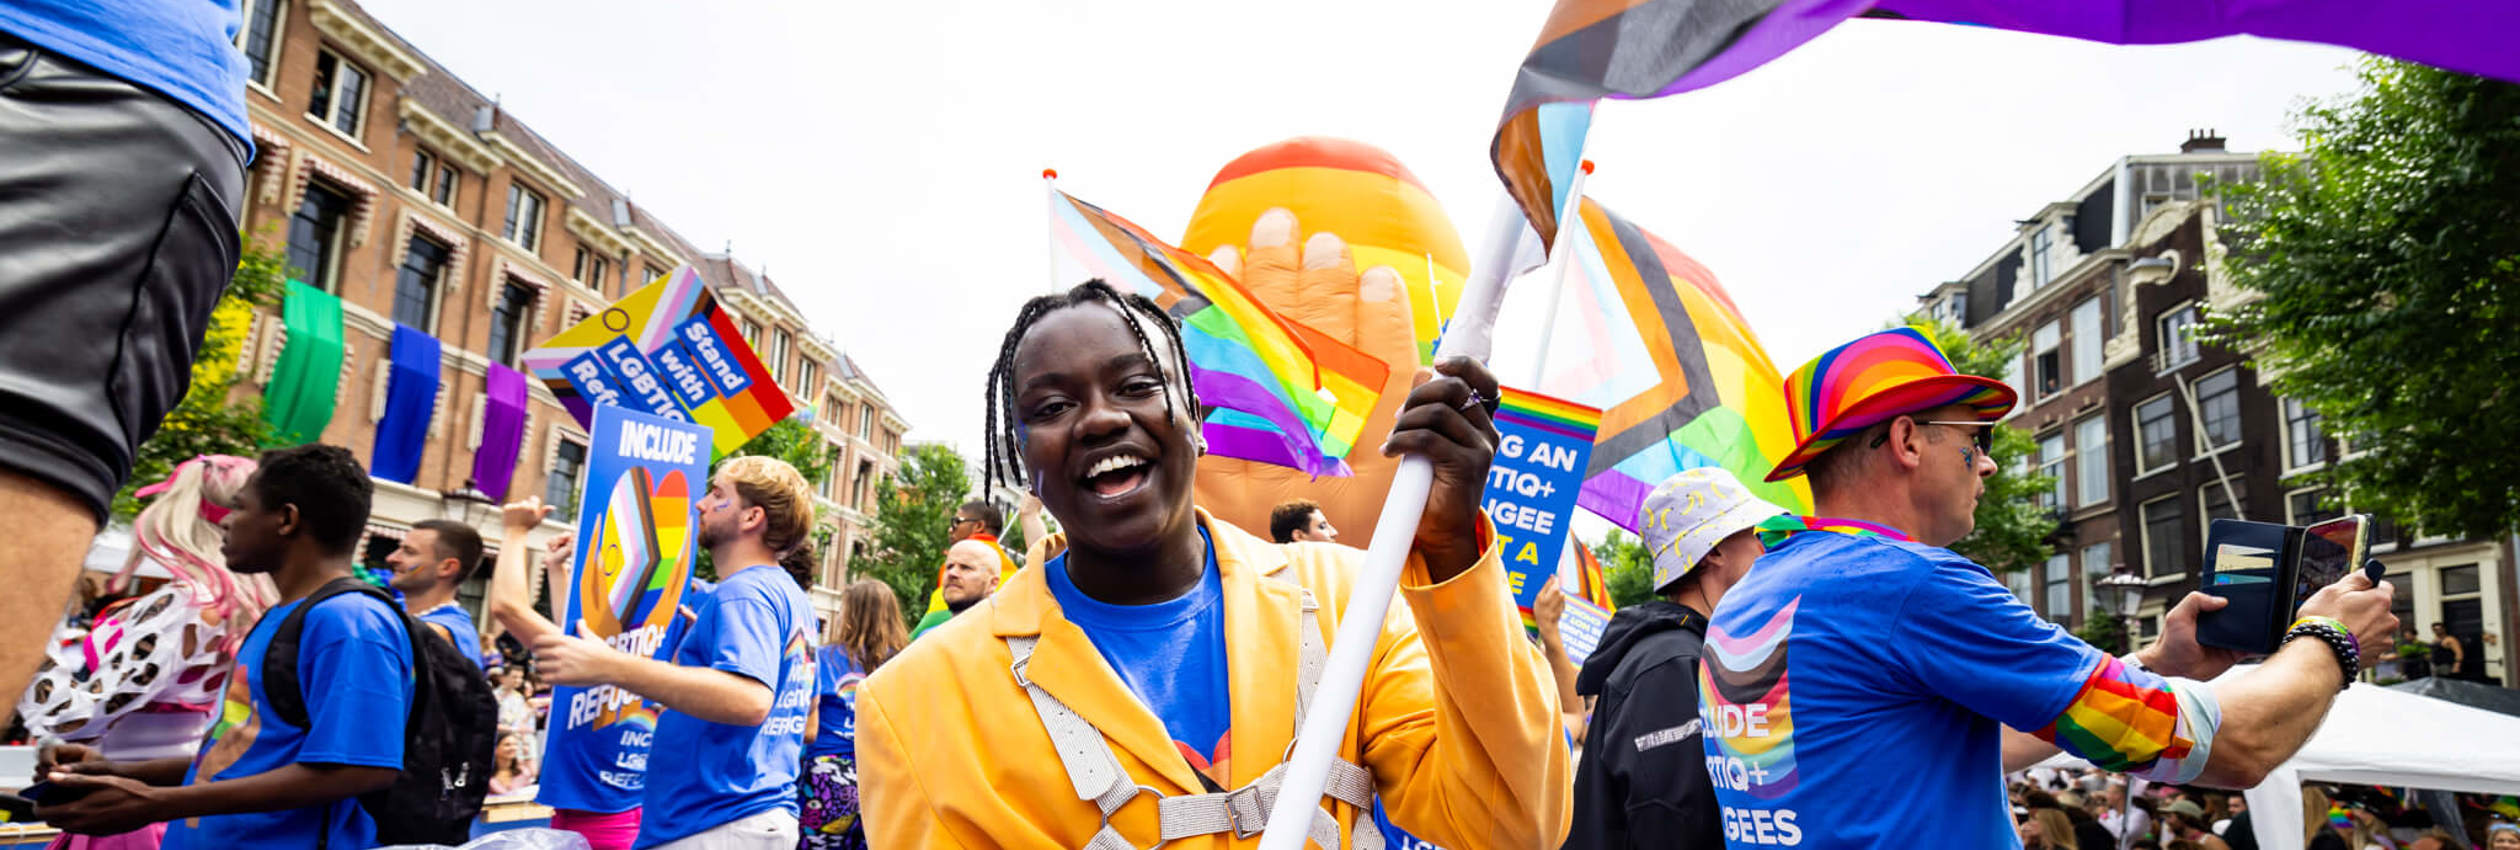 LGBTIQ+ refugees wave pride flags and hold up signs during a pride march in Amsterdam, The Netherlands